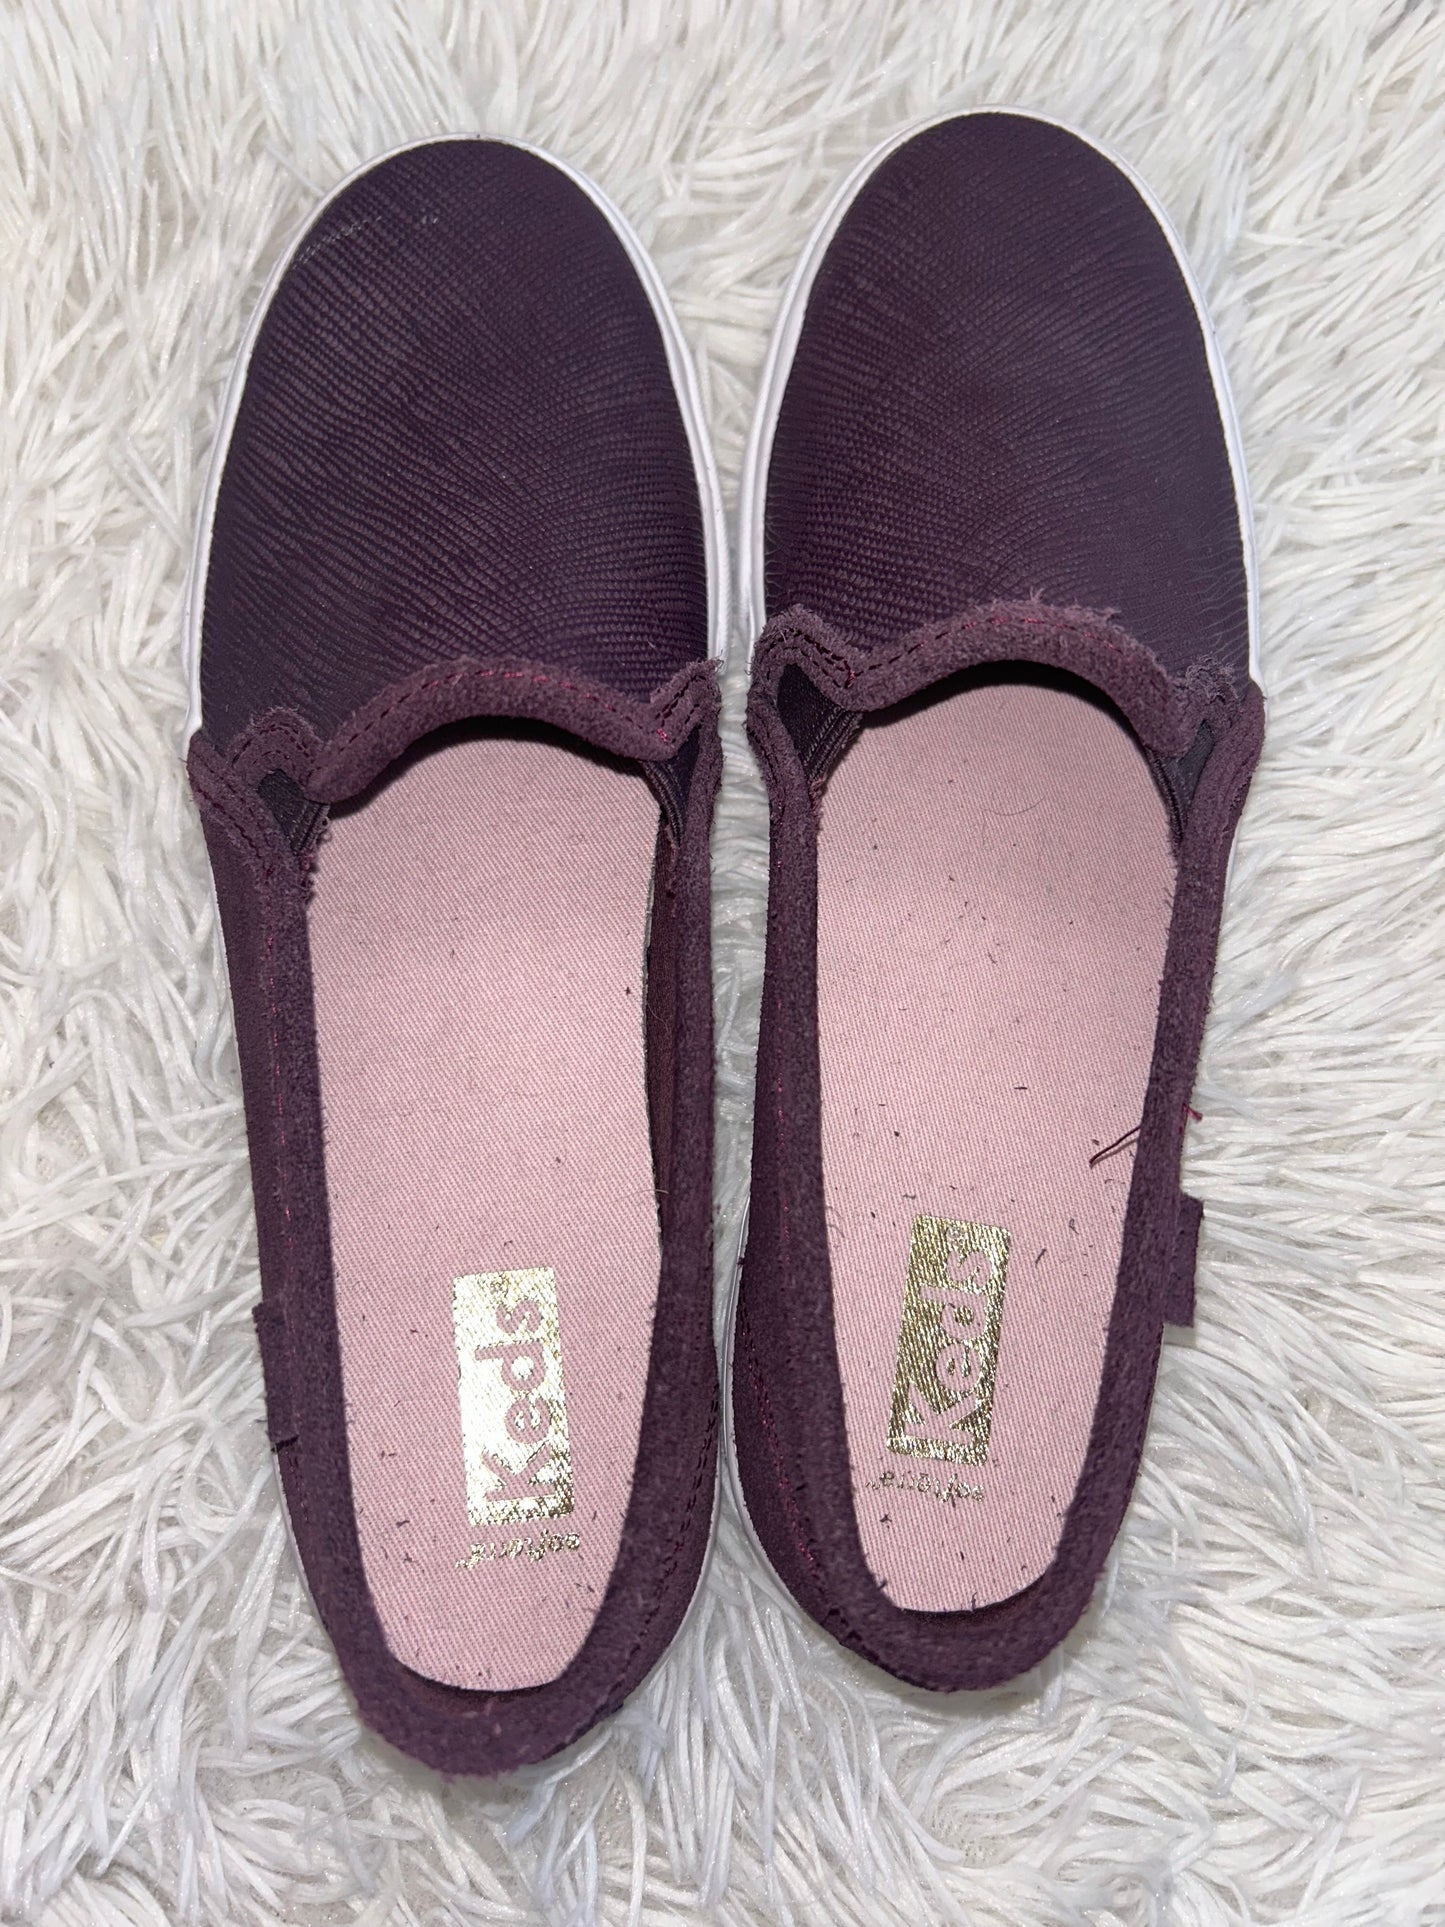 Shoes Flats Other By Keds  Size: 7.5